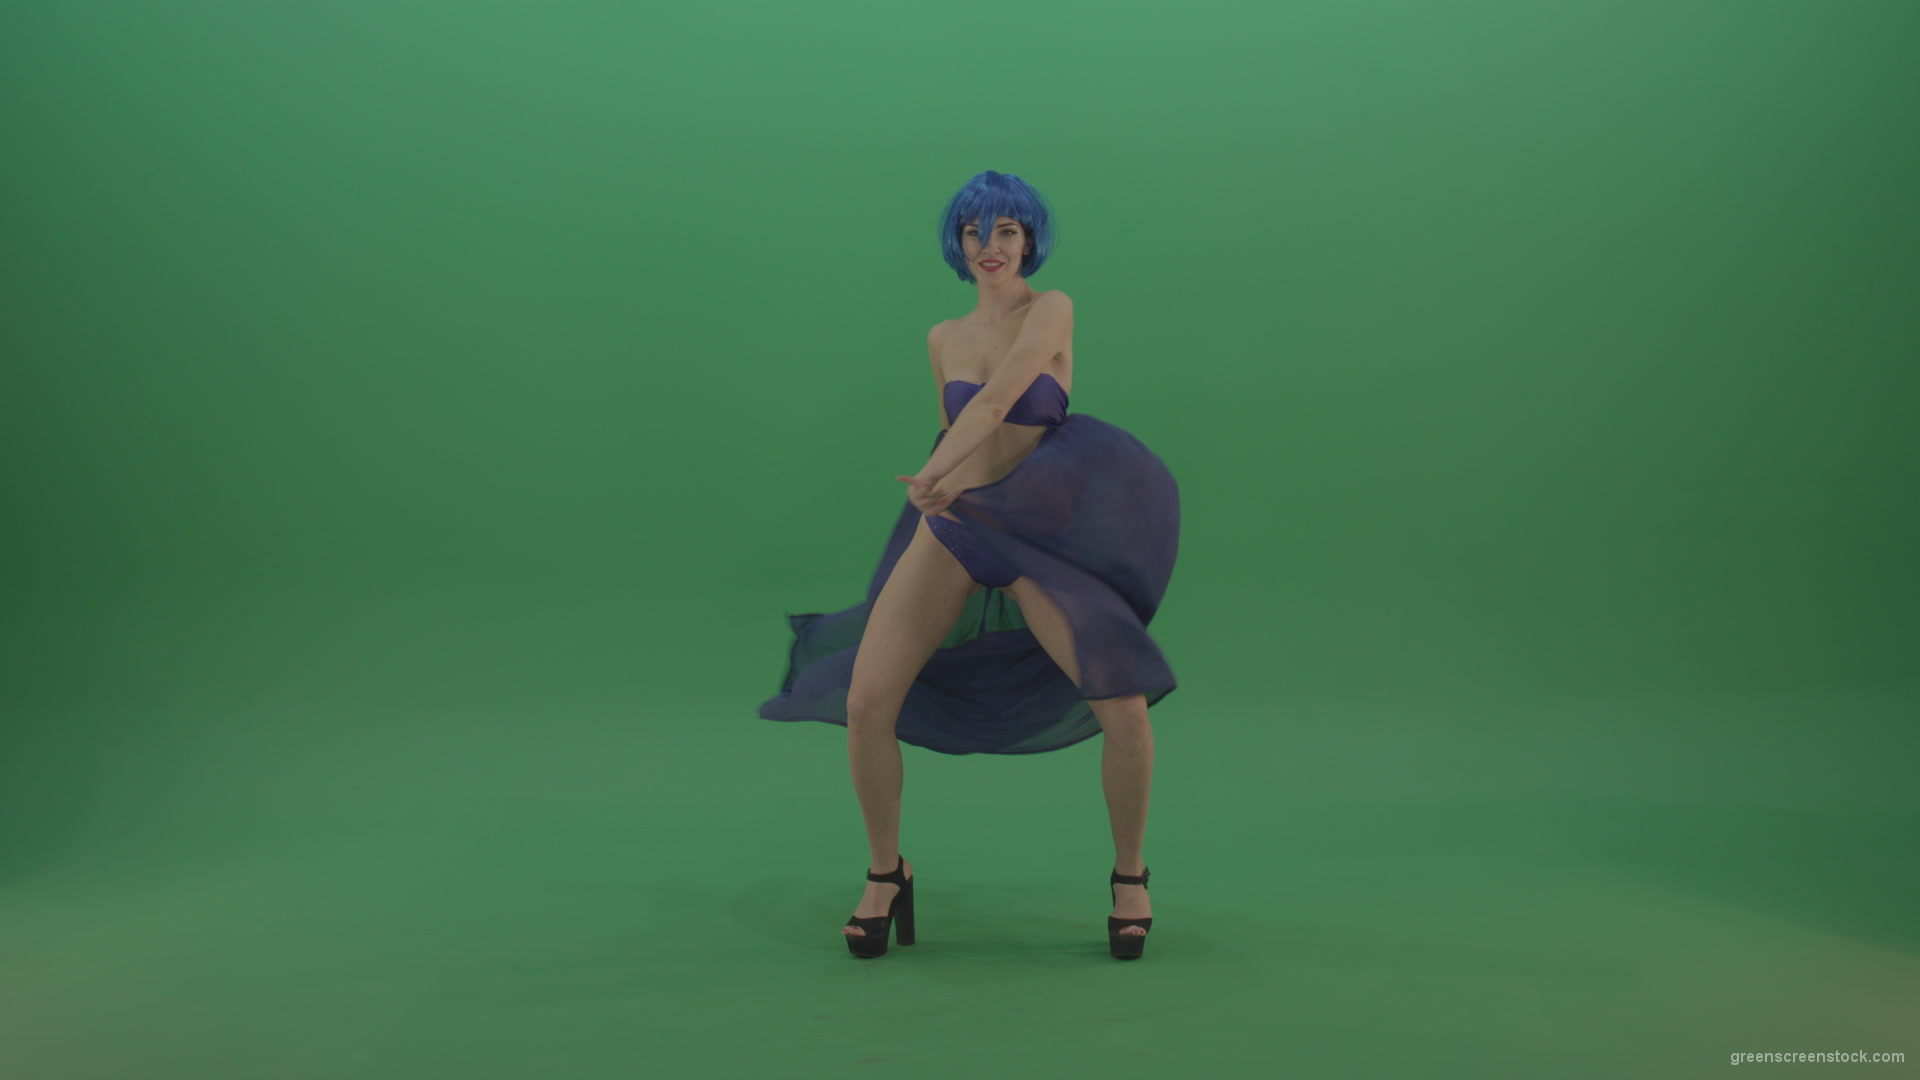 Full-size-erotic-young-girl-dancing-go-go-with-blue-dress-curtain-on-green-screen-1_009 Green Screen Stock